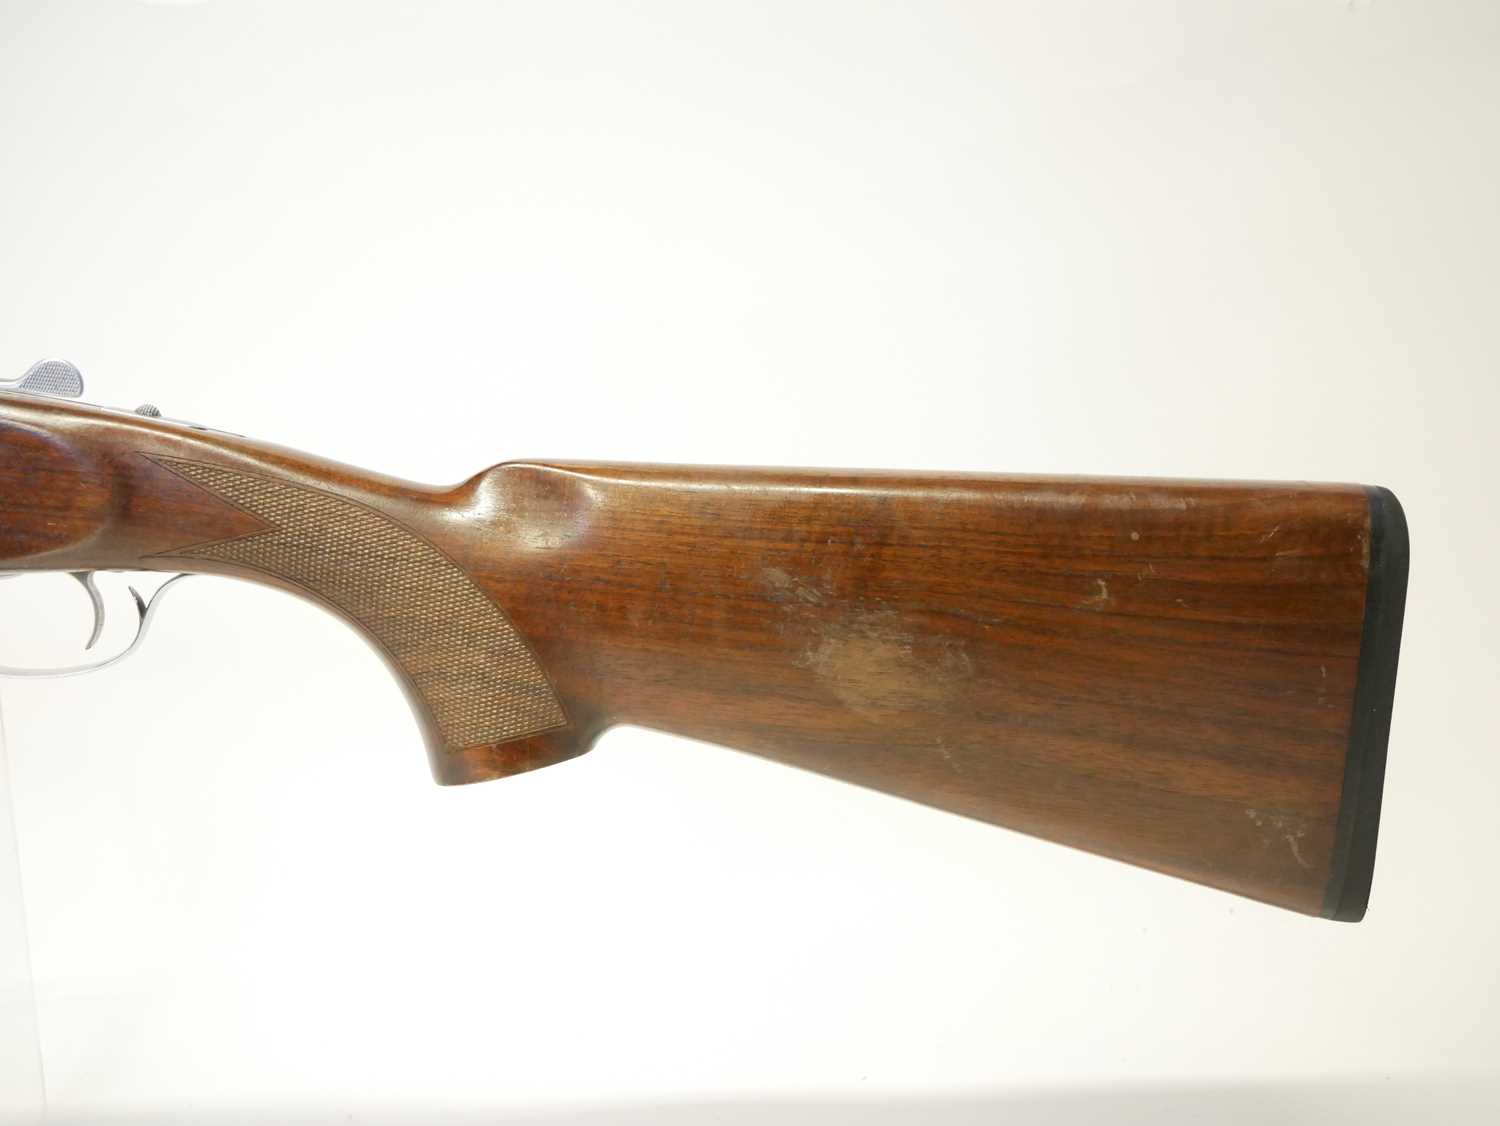 Yildiz 20 bore over and under shotgun, 30 inch barrels, (only two choke tubes present, no key) - Image 9 of 10